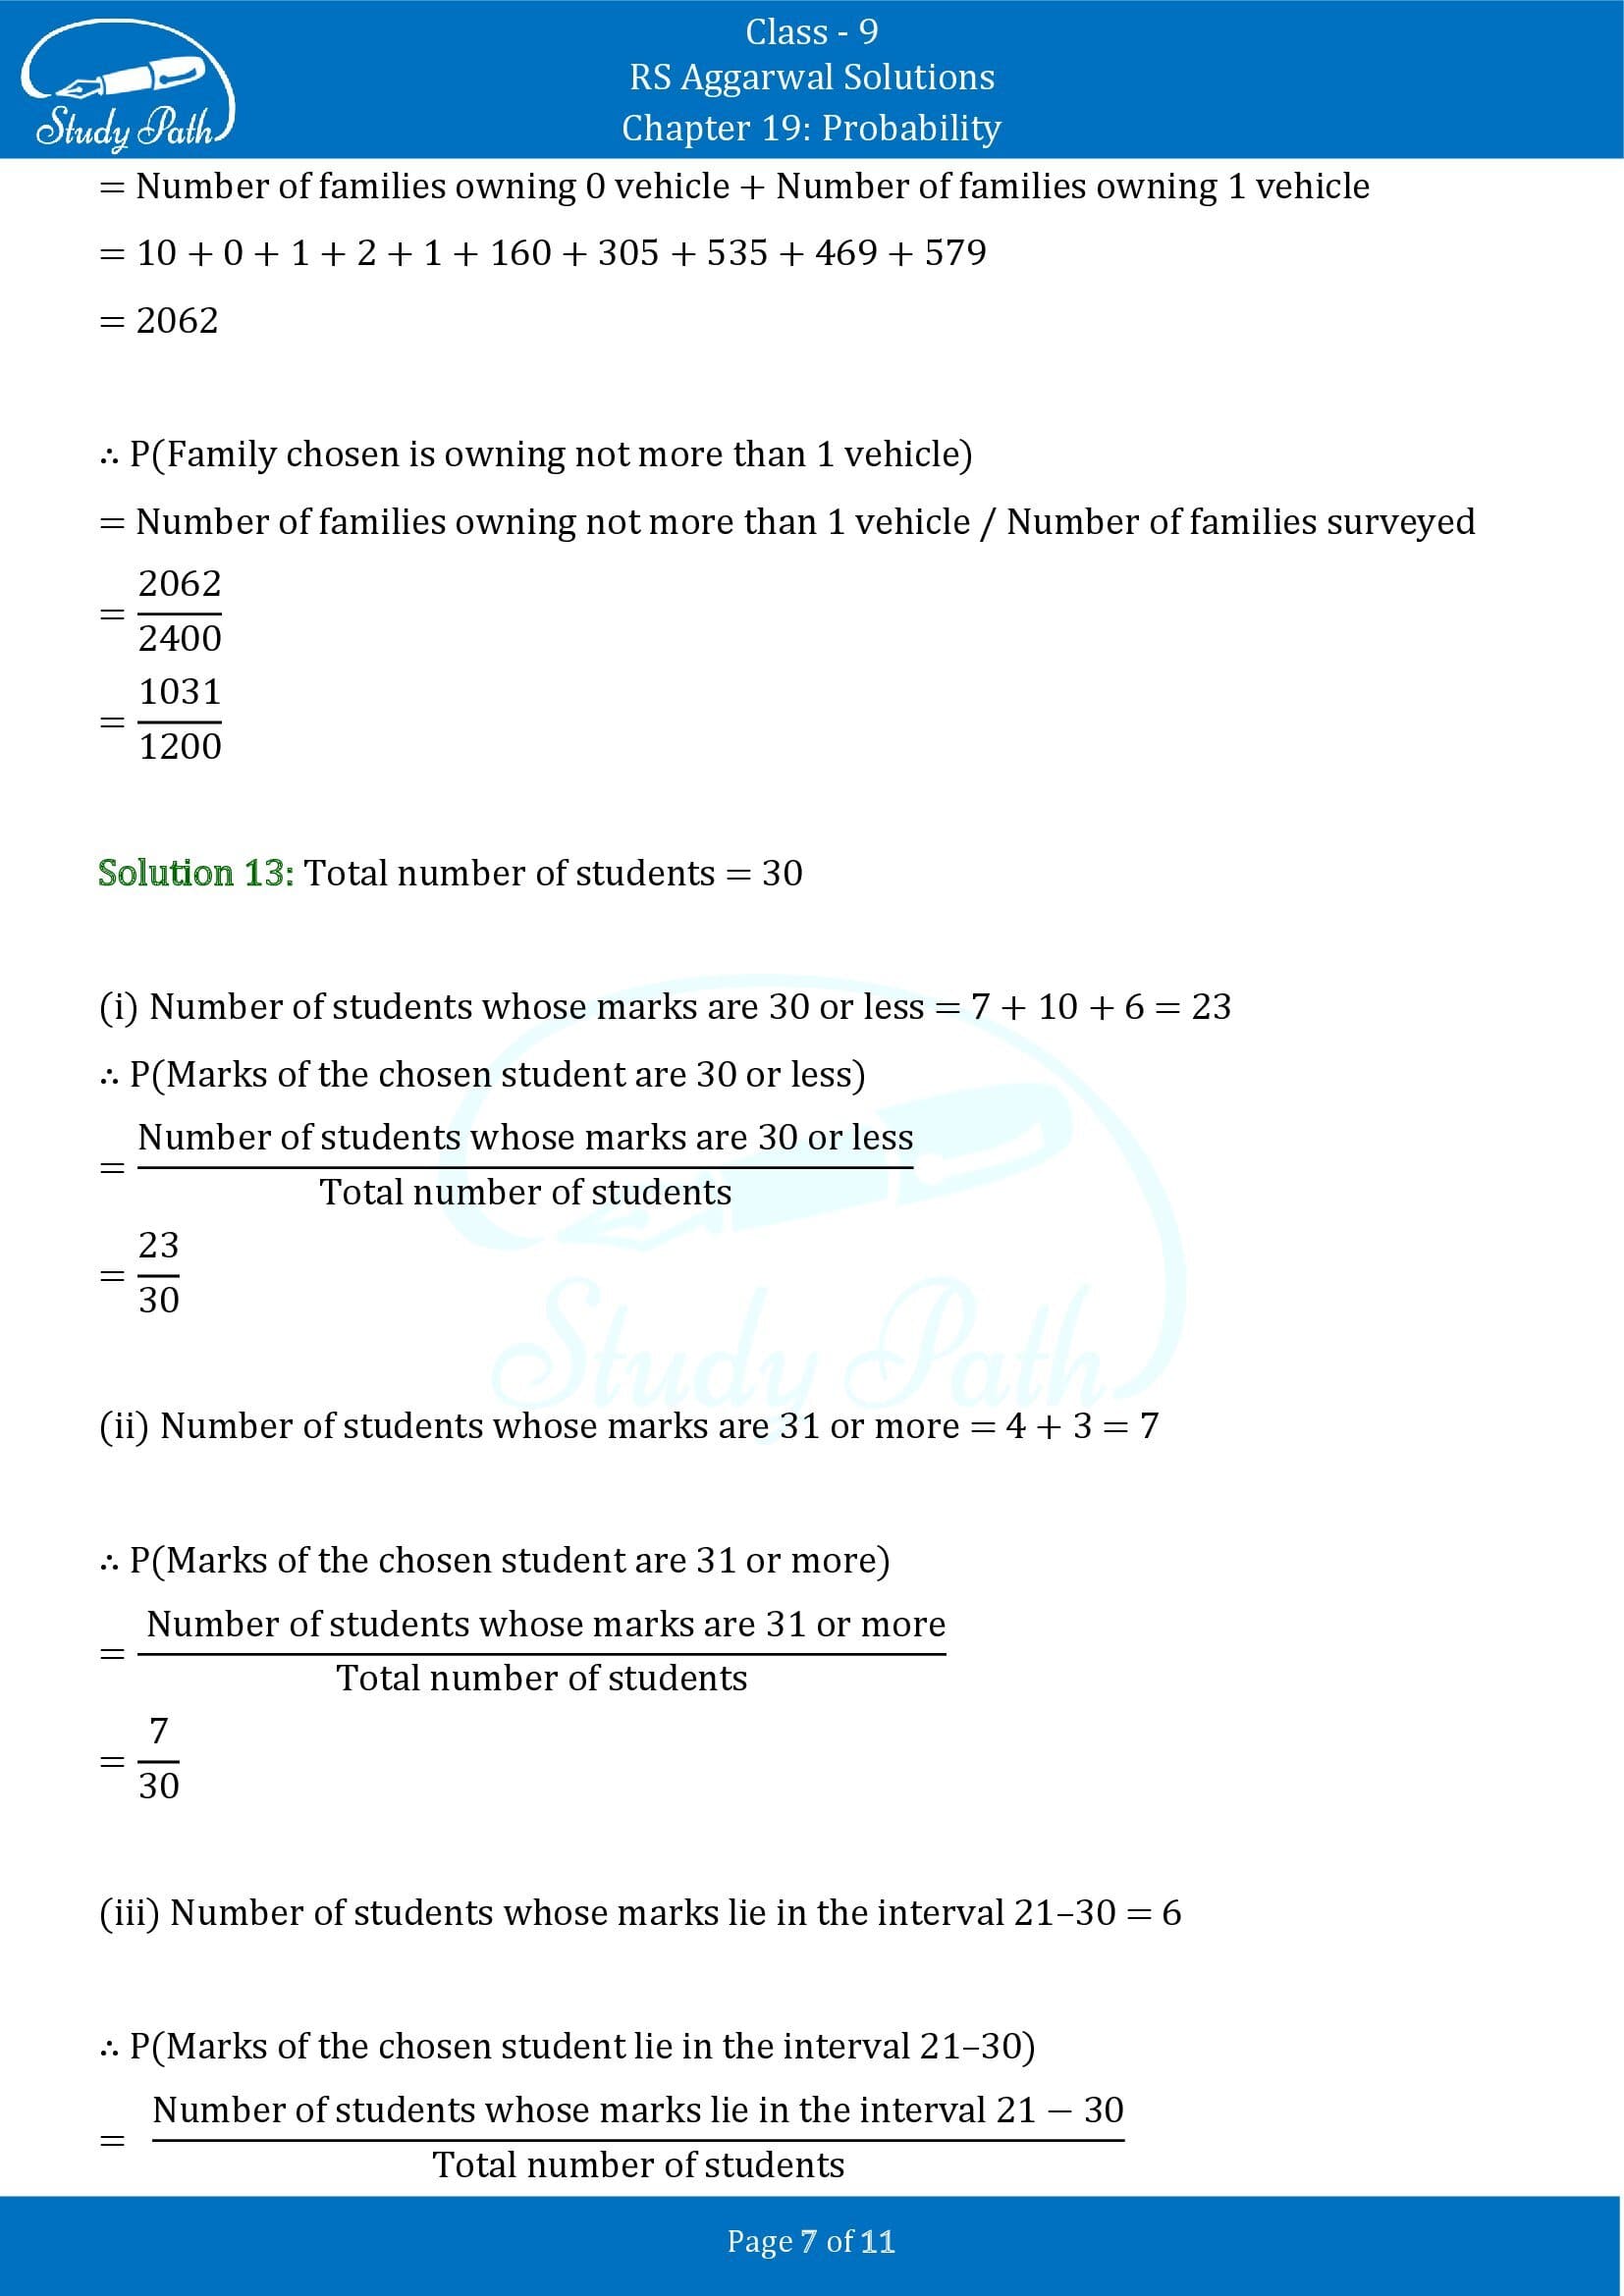 RS Aggarwal Solutions Class 9 Chapter 19 Probability Exercise 19 00007